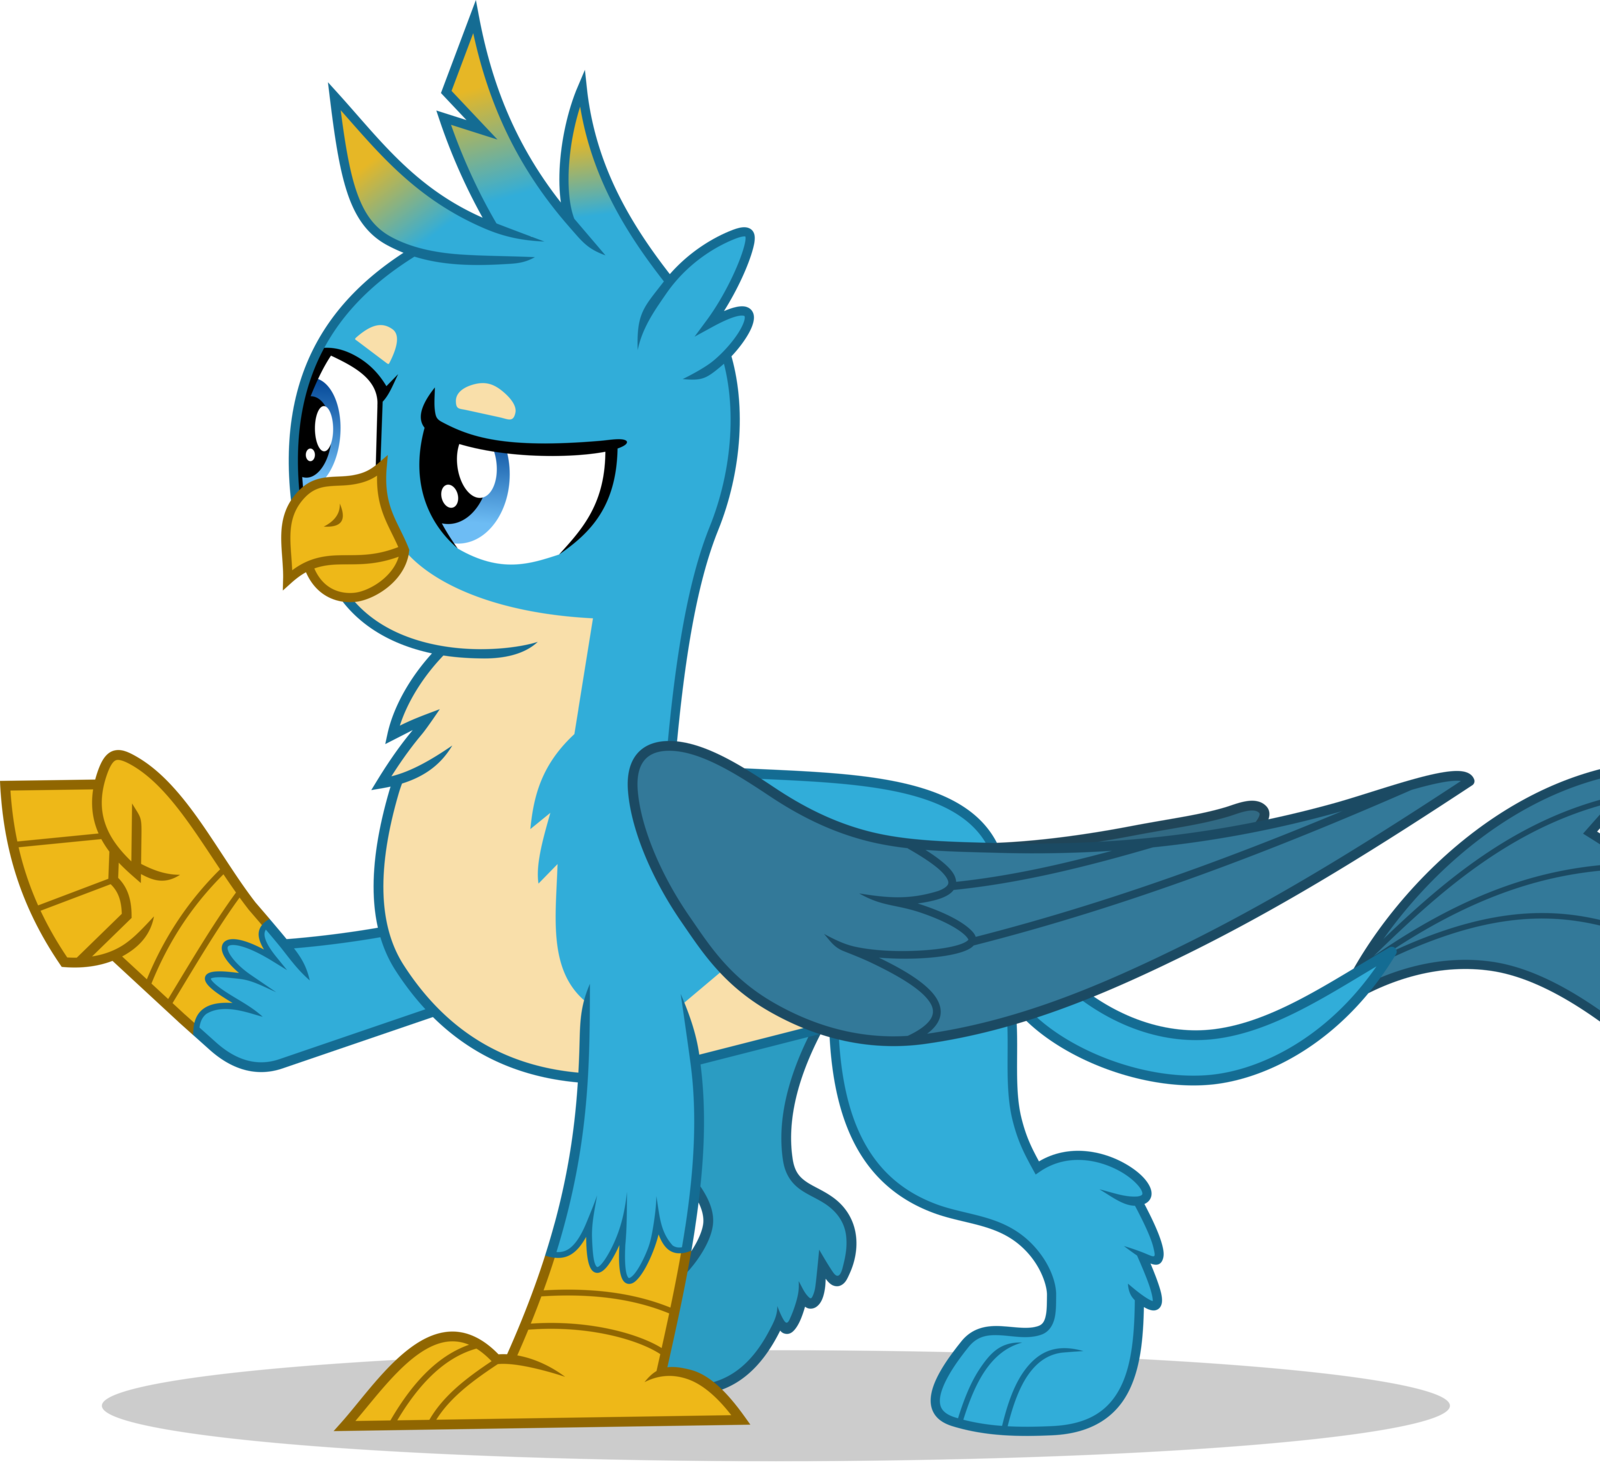 Gallus Fist Bump By Frownfactory Gallus Fist Bump By - Mlp Gallus Base (1600x1463)